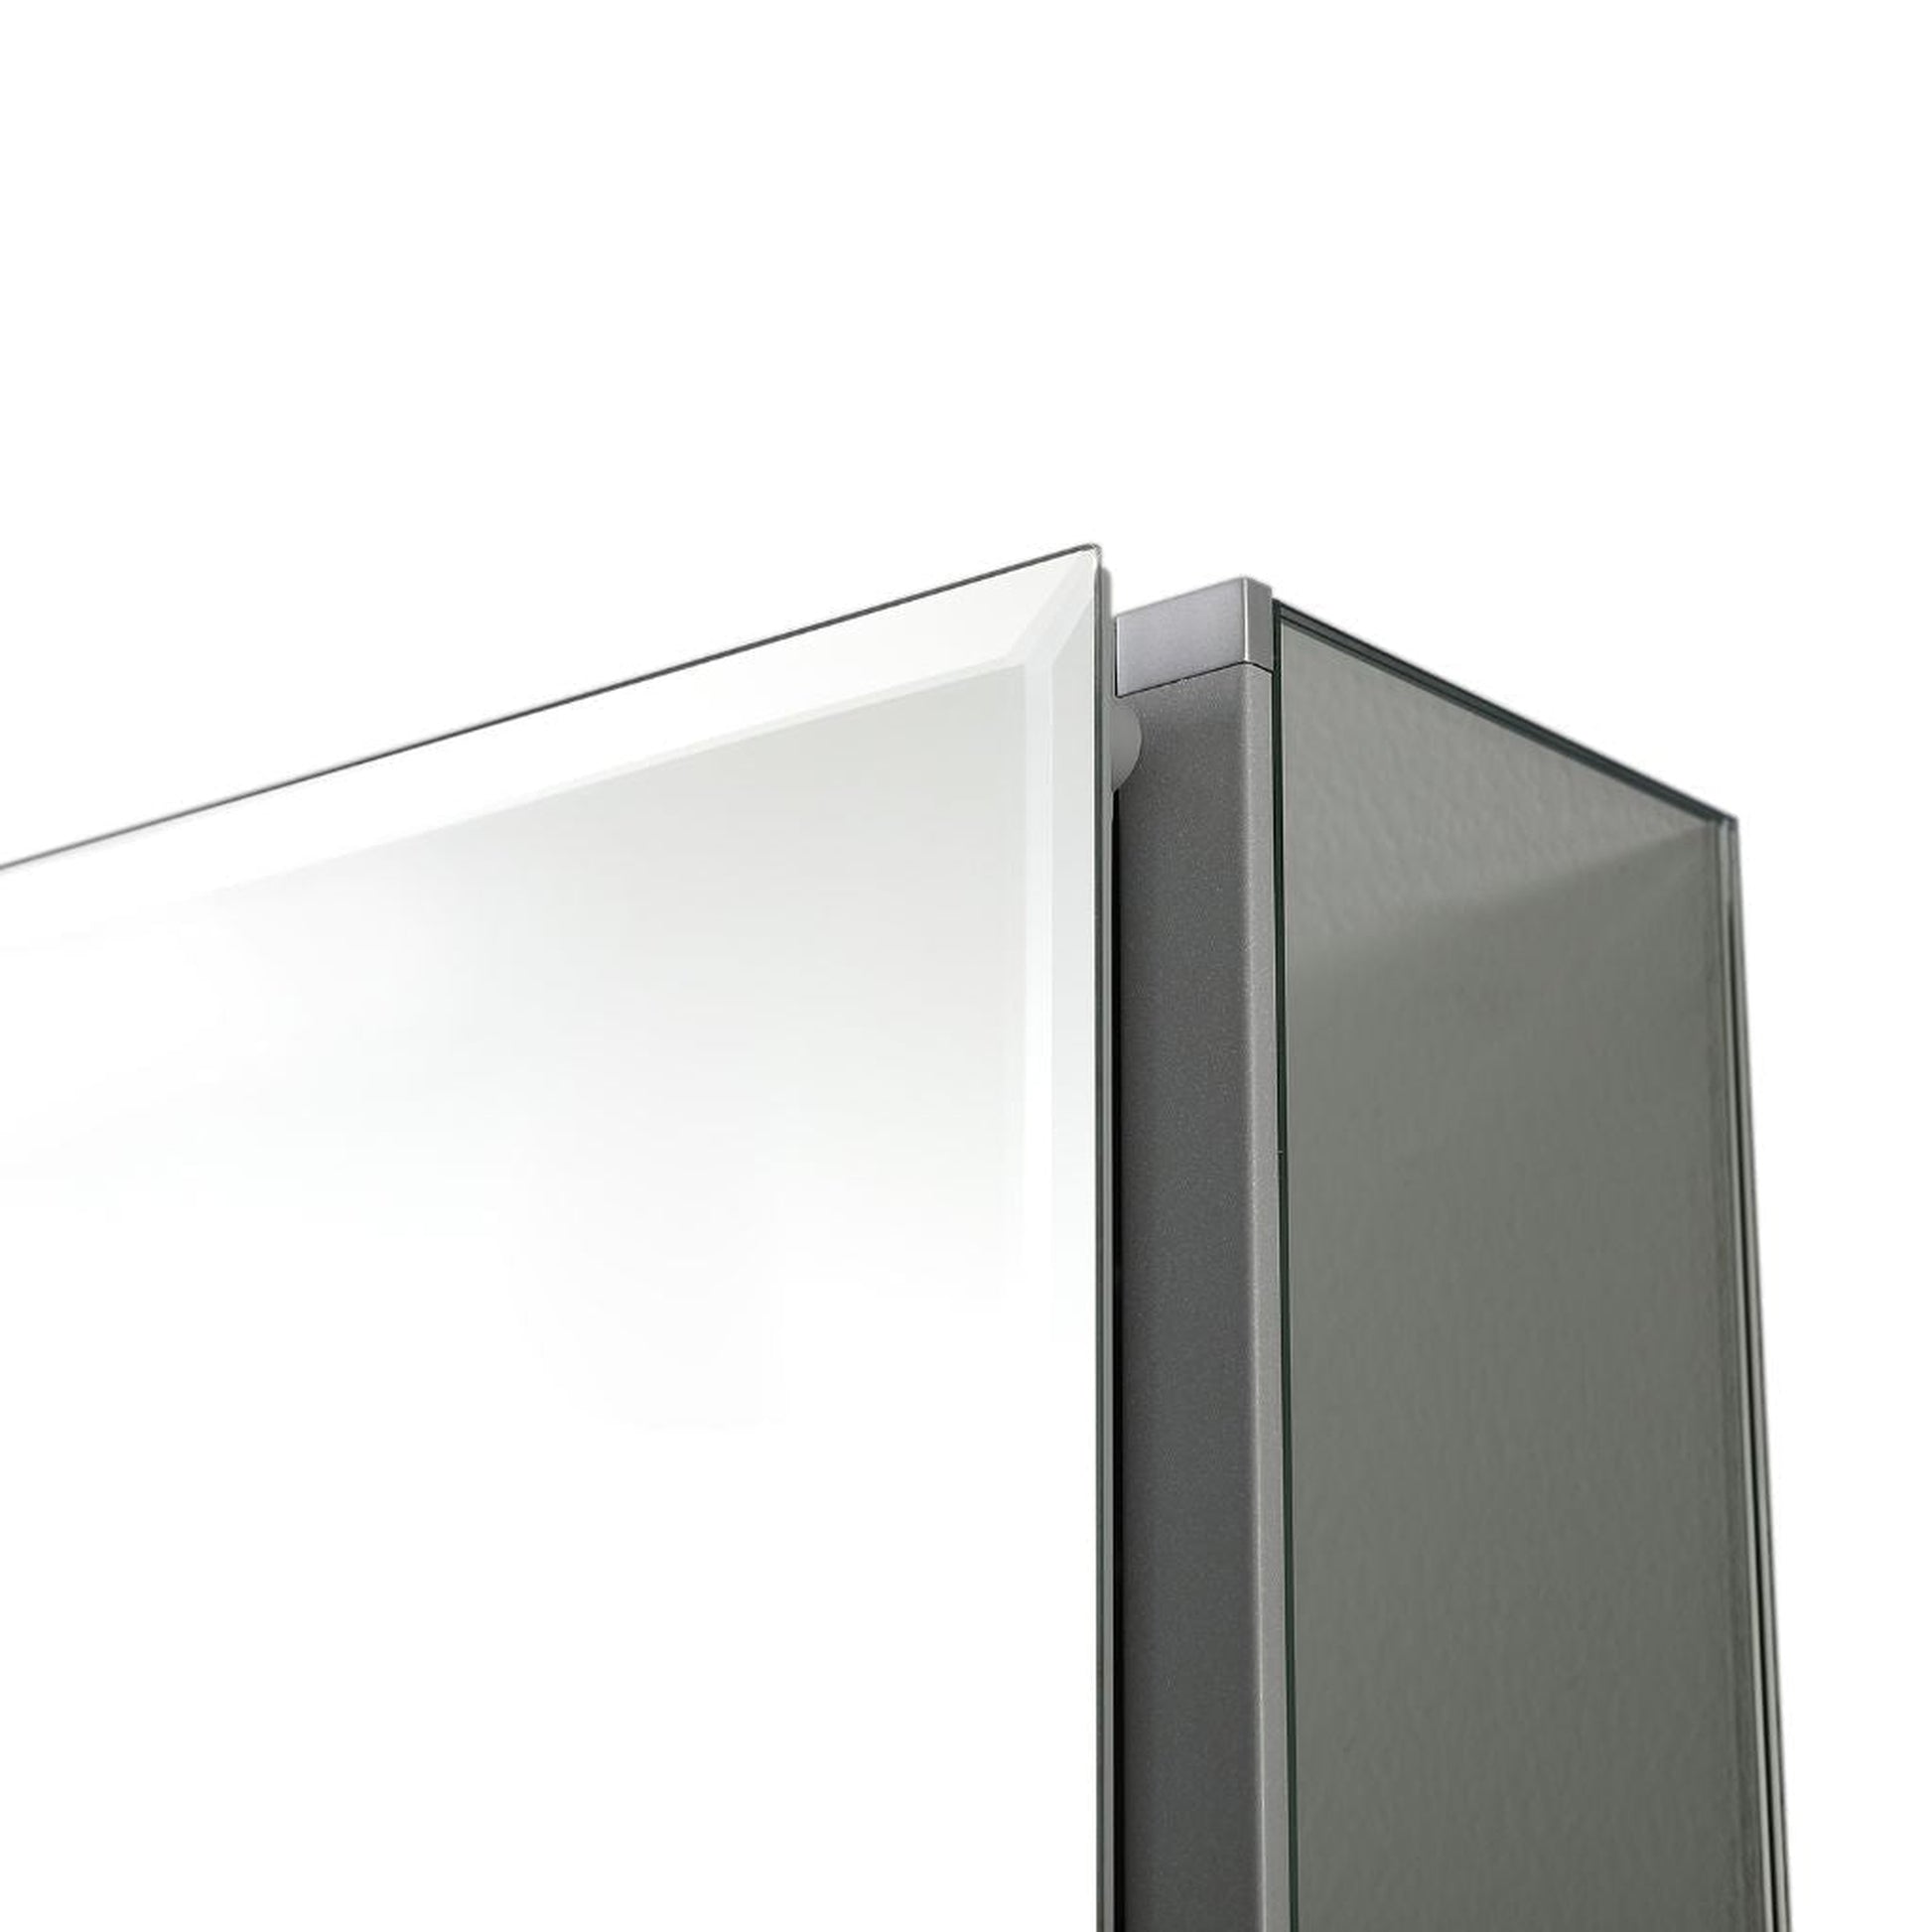 Blossom MC8 15" x 26" Recessed or Surface Mount Left or Right-Hand Swing Door Aluminum Medicine Cabinet With Mirror, Adjustable Hinges and Adjustable Glass Shelves